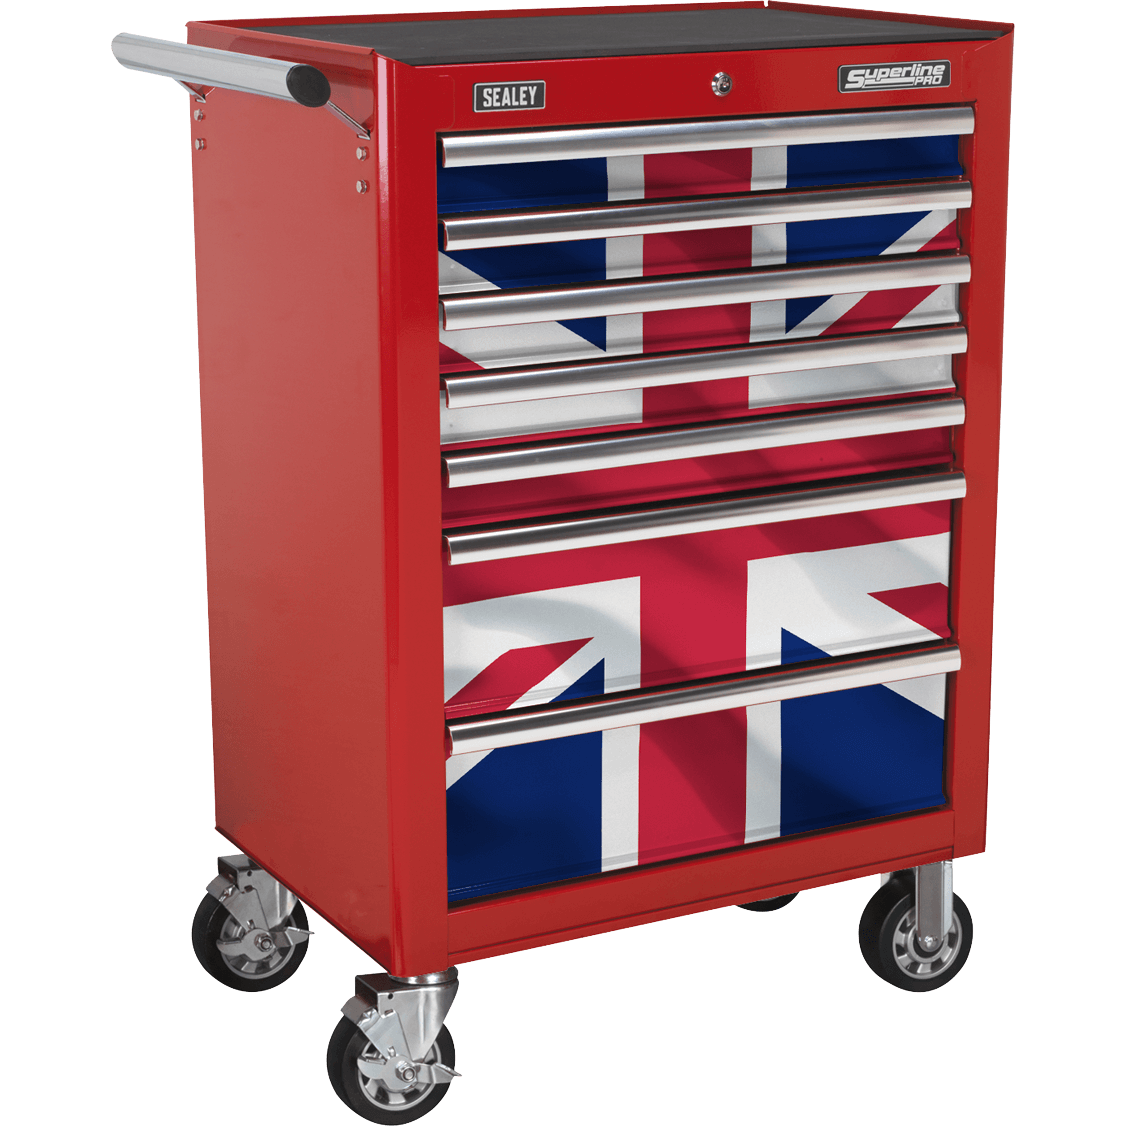 Sealey 7 Drawer Union Jack Tool Roller Cabinet Red